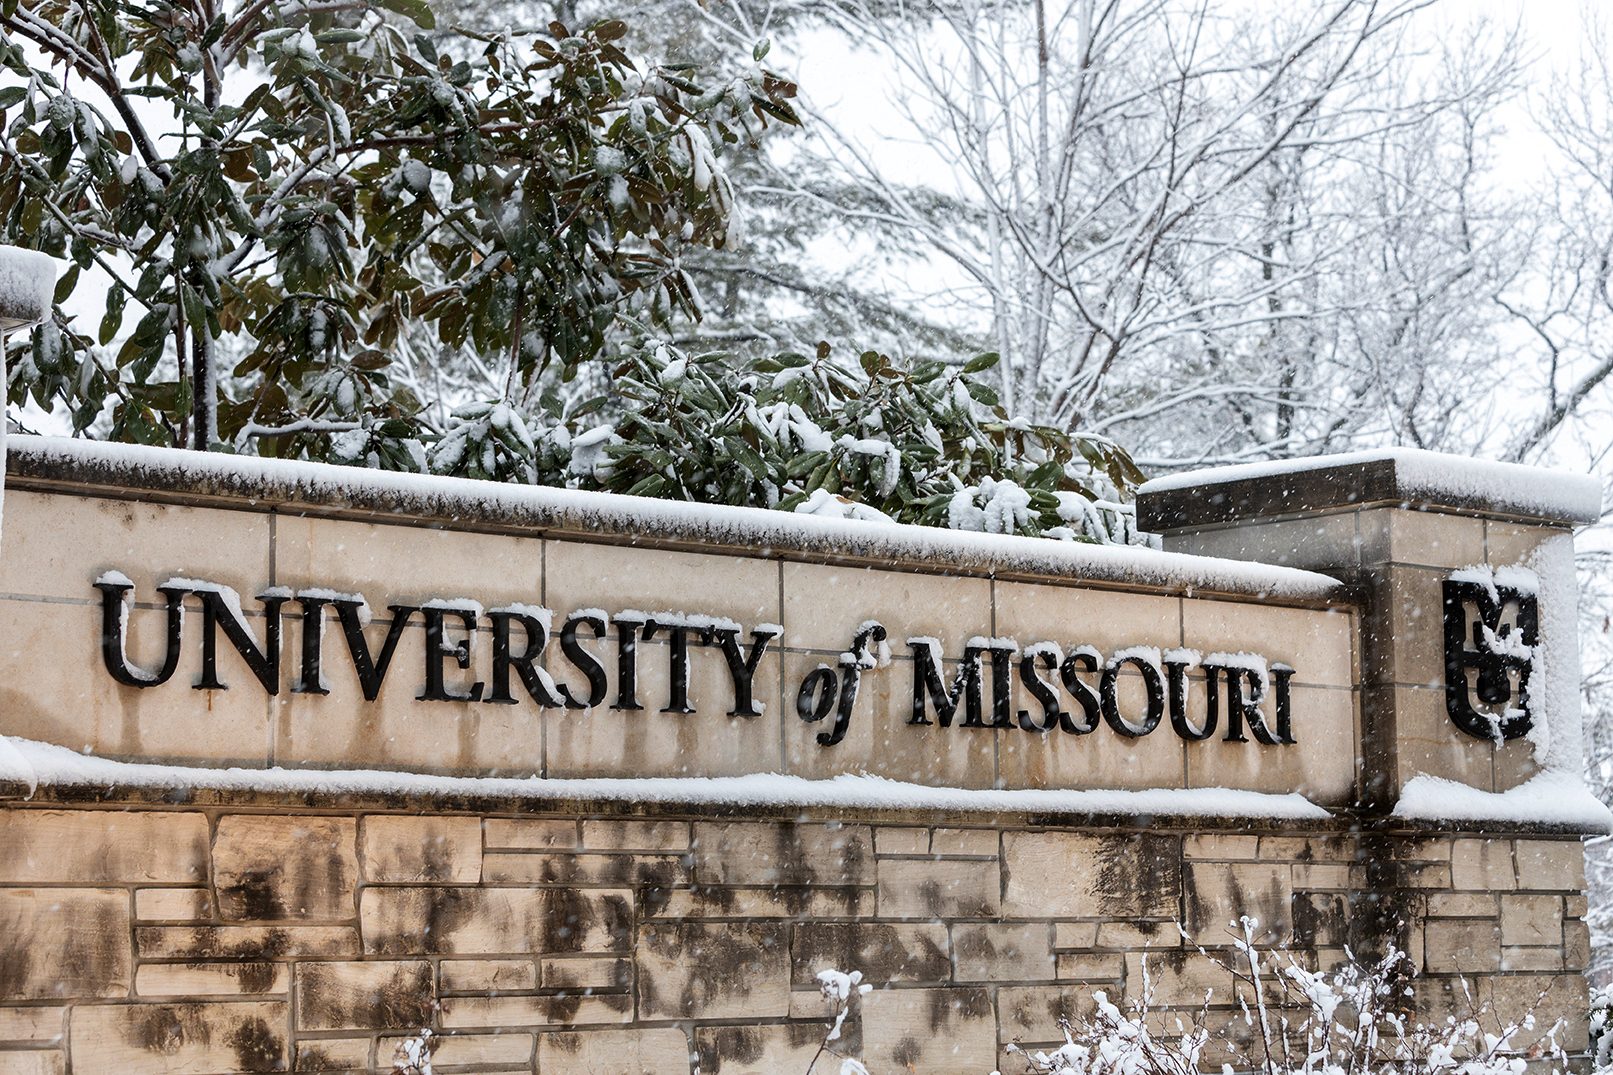 university of missouri sign covered in snow